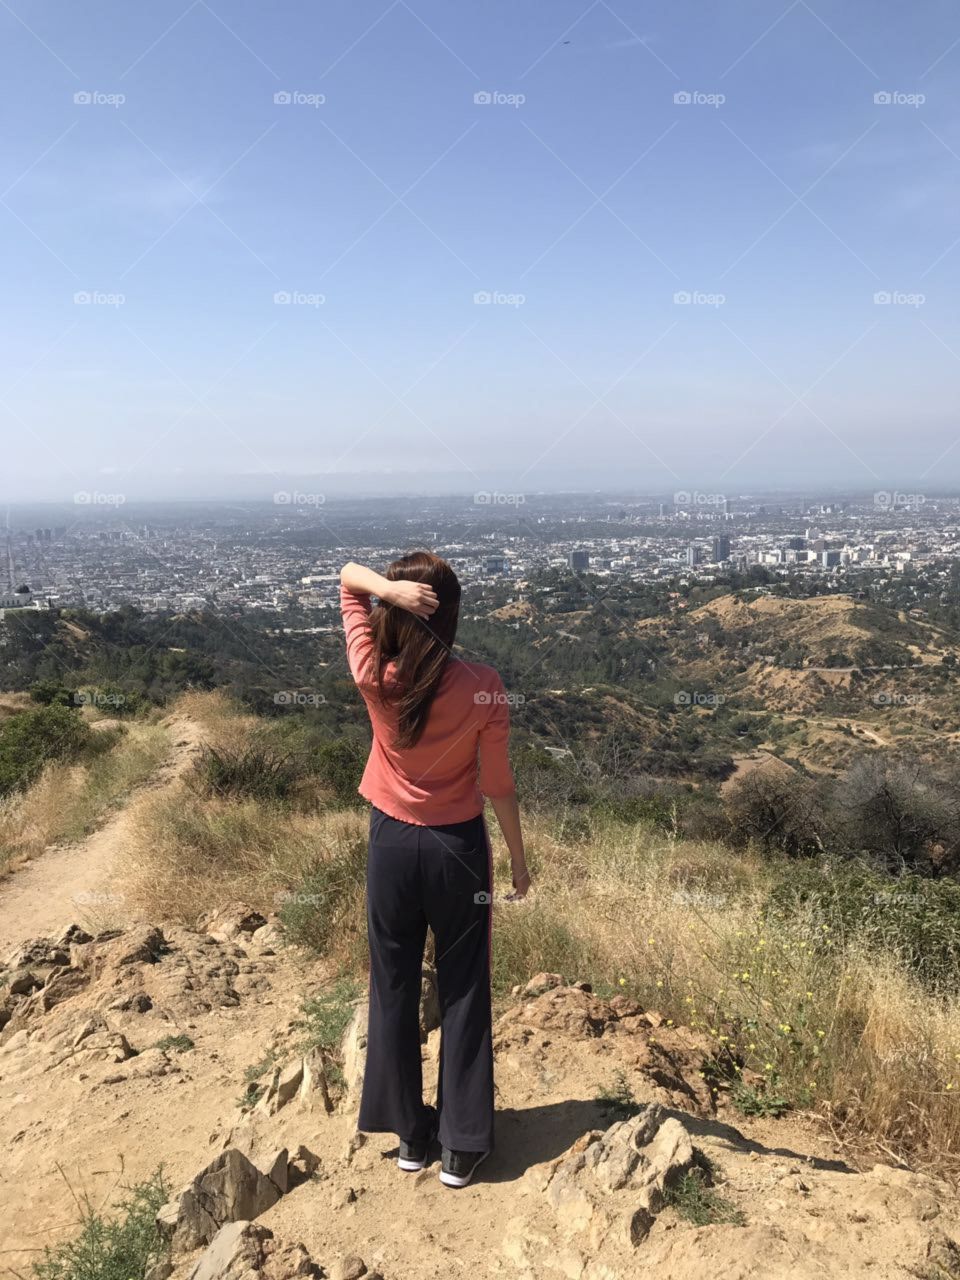 Looking at the view of Los Angeles